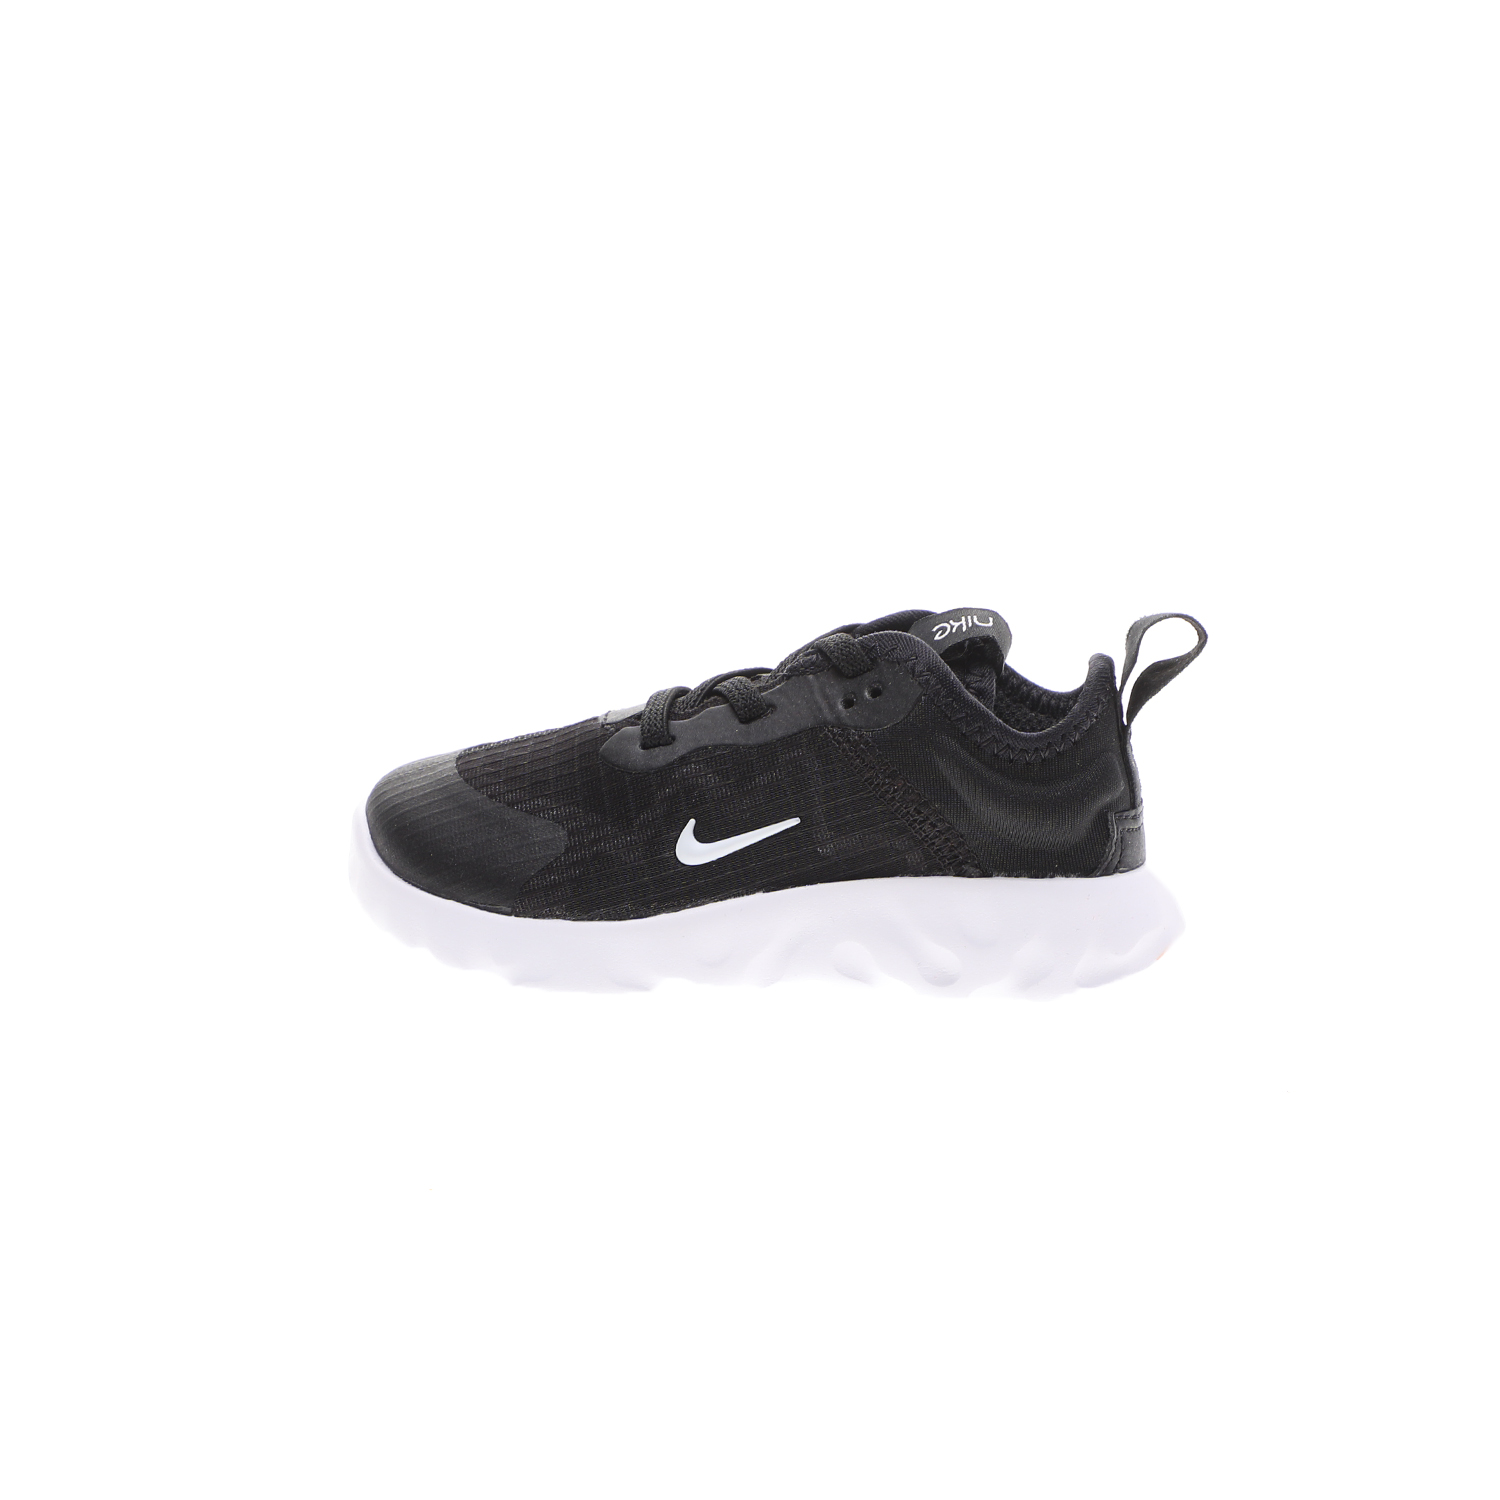 NIKE – Βρεφικά αθλητικά παπούτσια NIKE LUCENT (TD) μαύρα